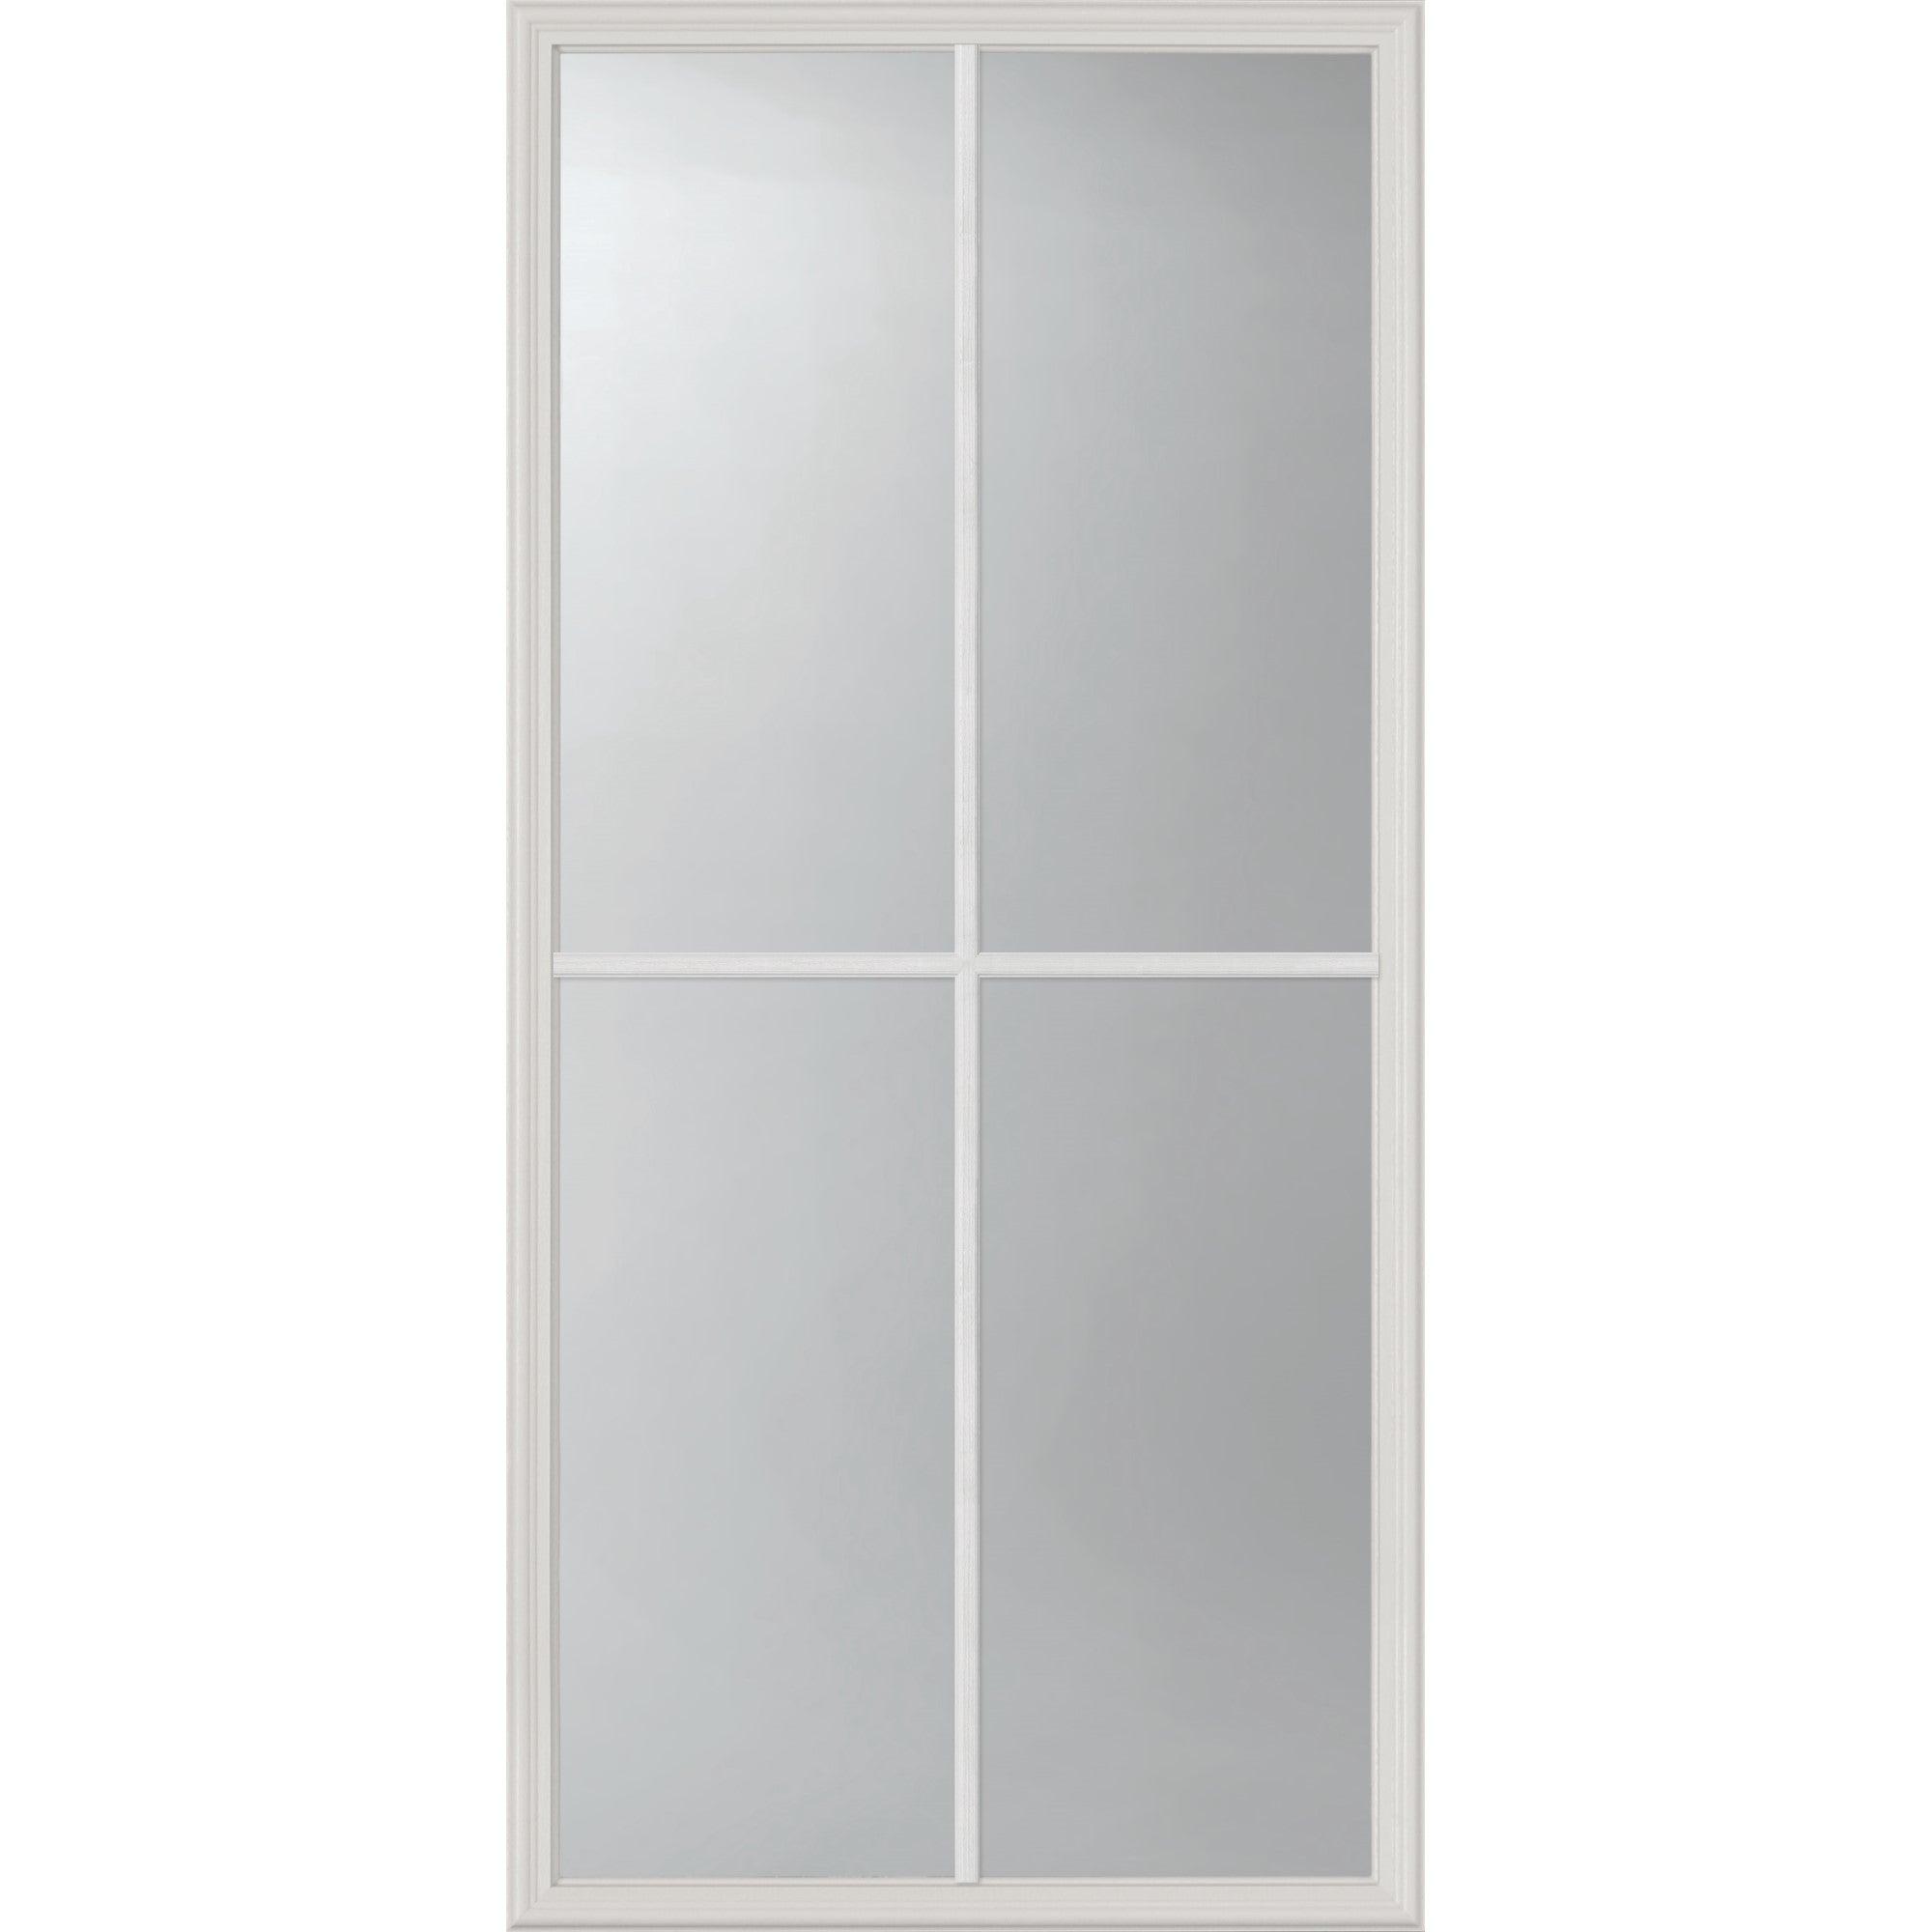 Clear 4 Lite Glass and Frame Kit (3/4 Lite 24" x 50" Frame Size) - Pease Doors: The Door Store